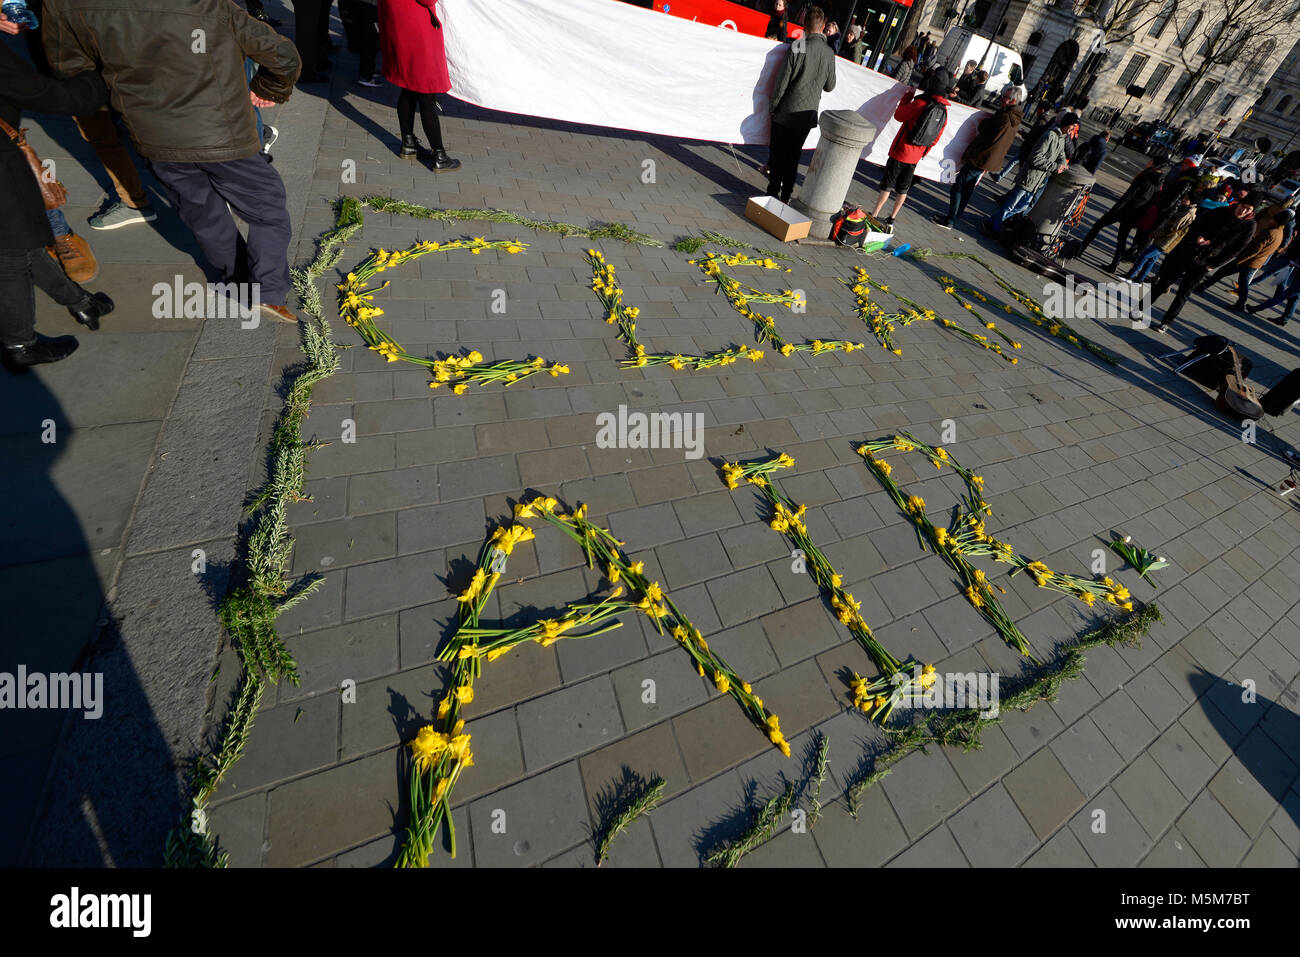 A demonstration in Trafalgar Square to promote clean air and protest against pollution, organised in part by ‘London Clean Air Coalition” Stock Photo